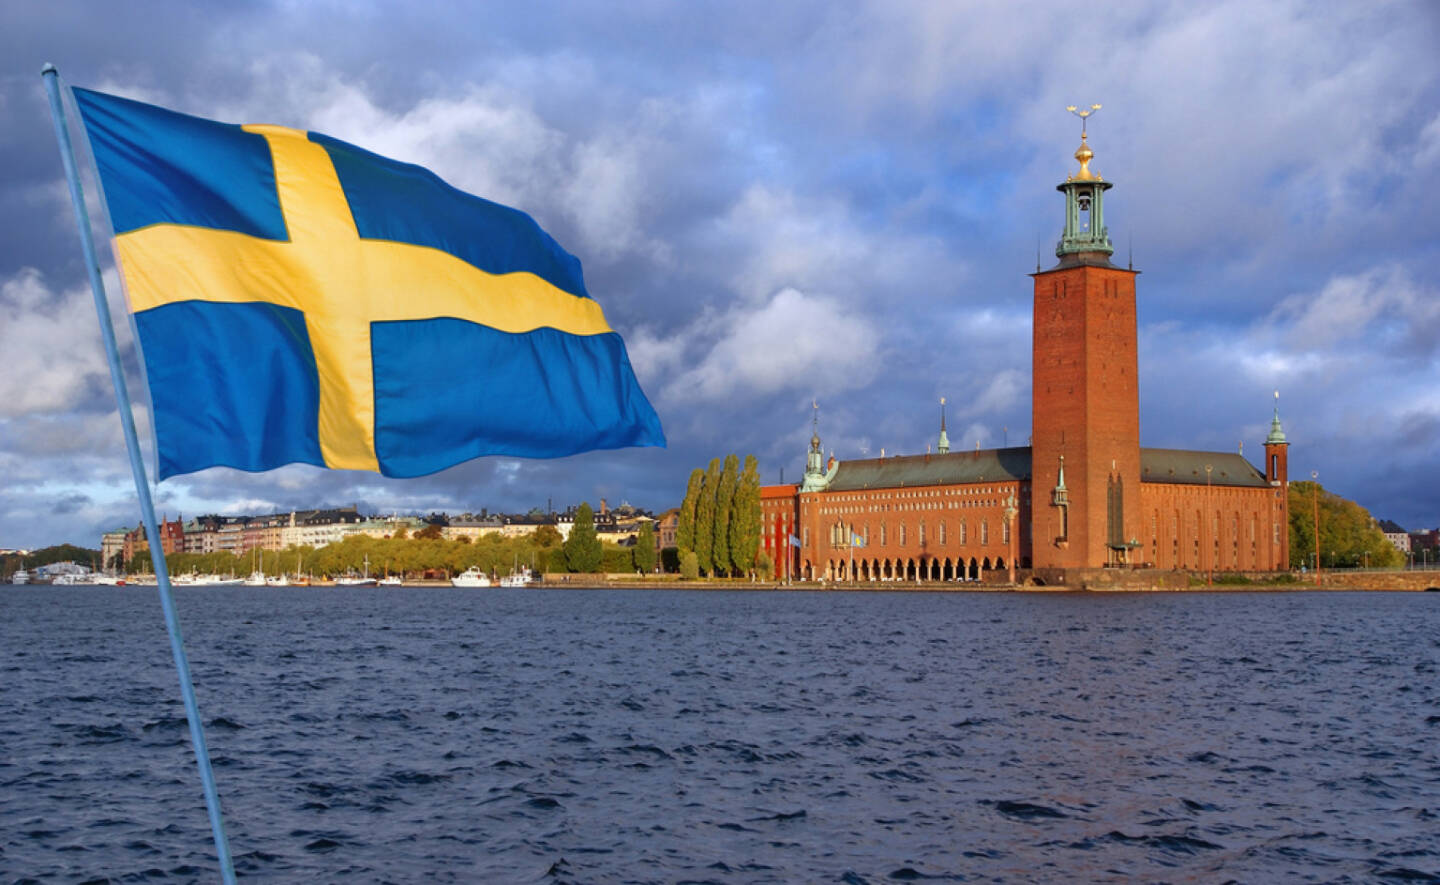 Stockholm, Schweden, Fahne, Flagge, http://www.shutterstock.com/de/pic-93717142/stock-photo-stockholm-view-of-city-hall-from-the-lake-mclaren-with-flag.html? 